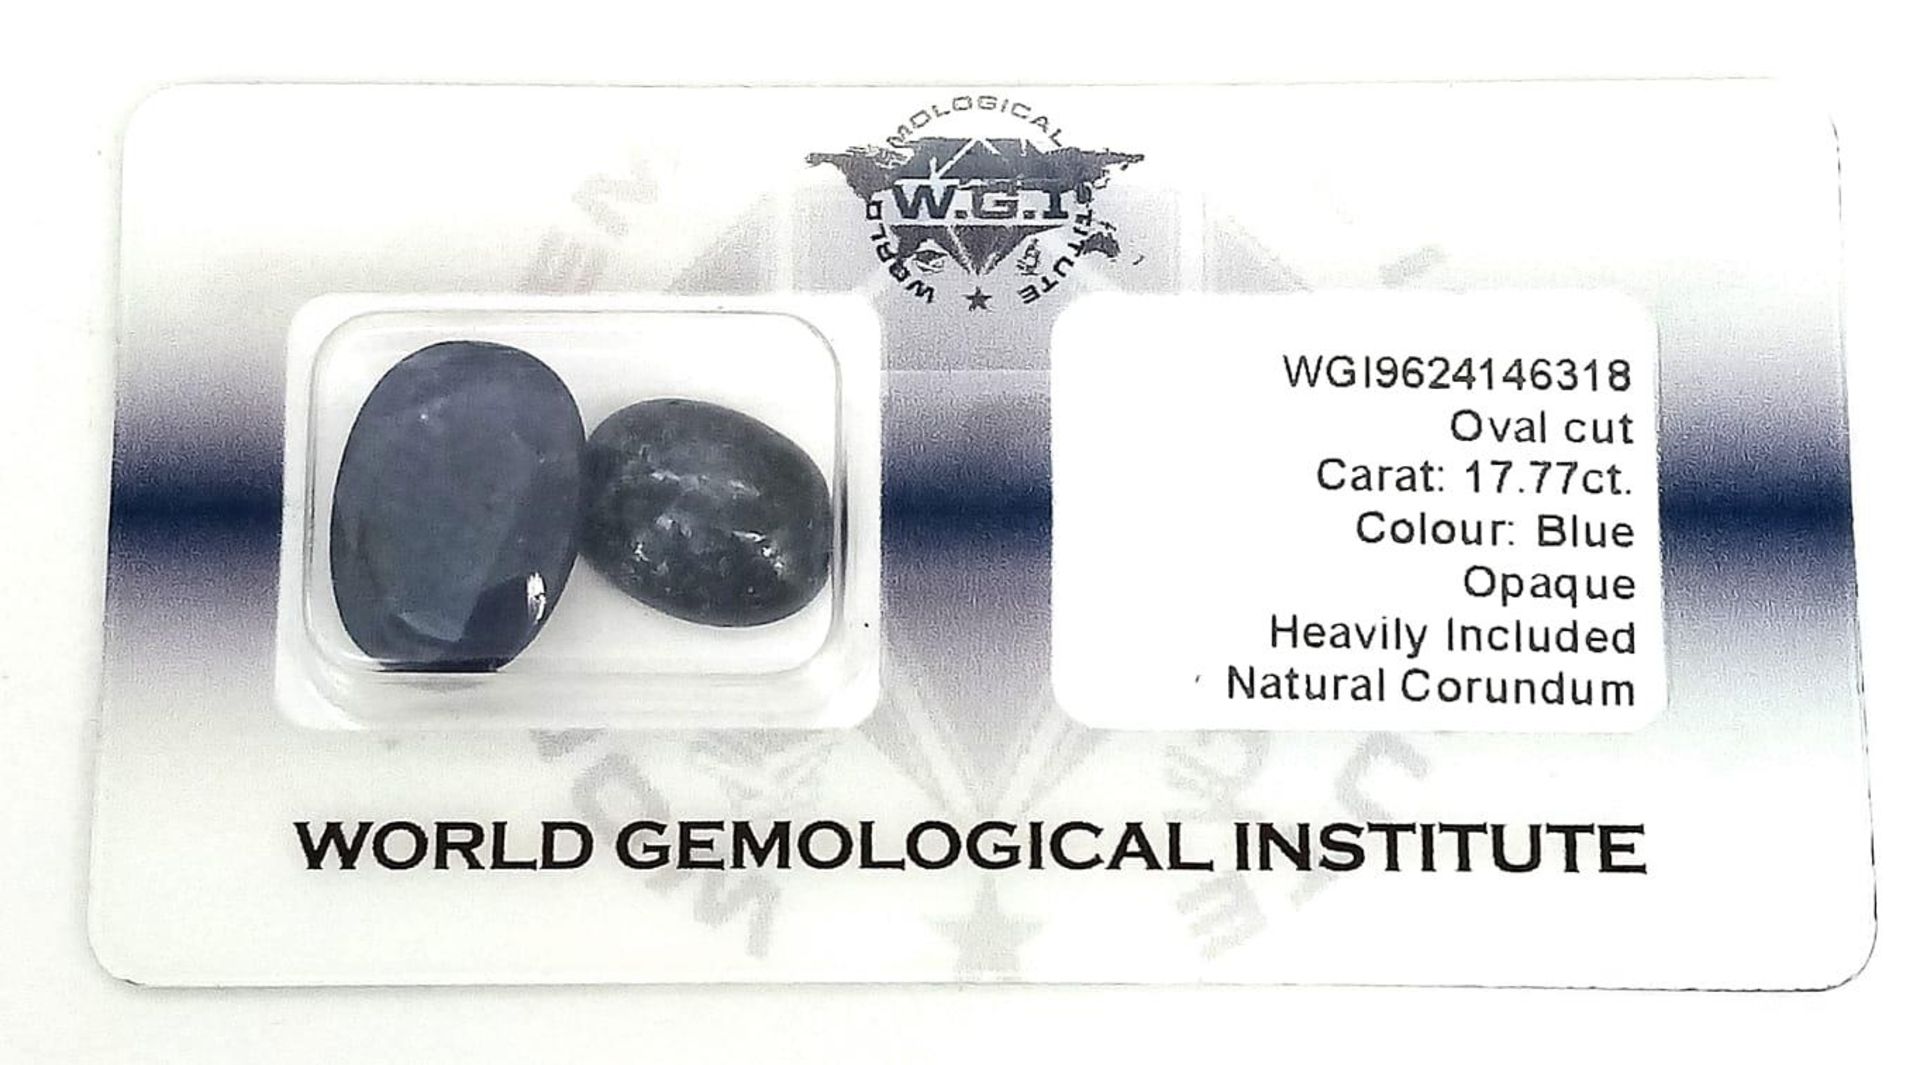 17.77ct of Natural Corundum. Two pieces - oval cut. Comes with a WGI certificate. - Image 2 of 4